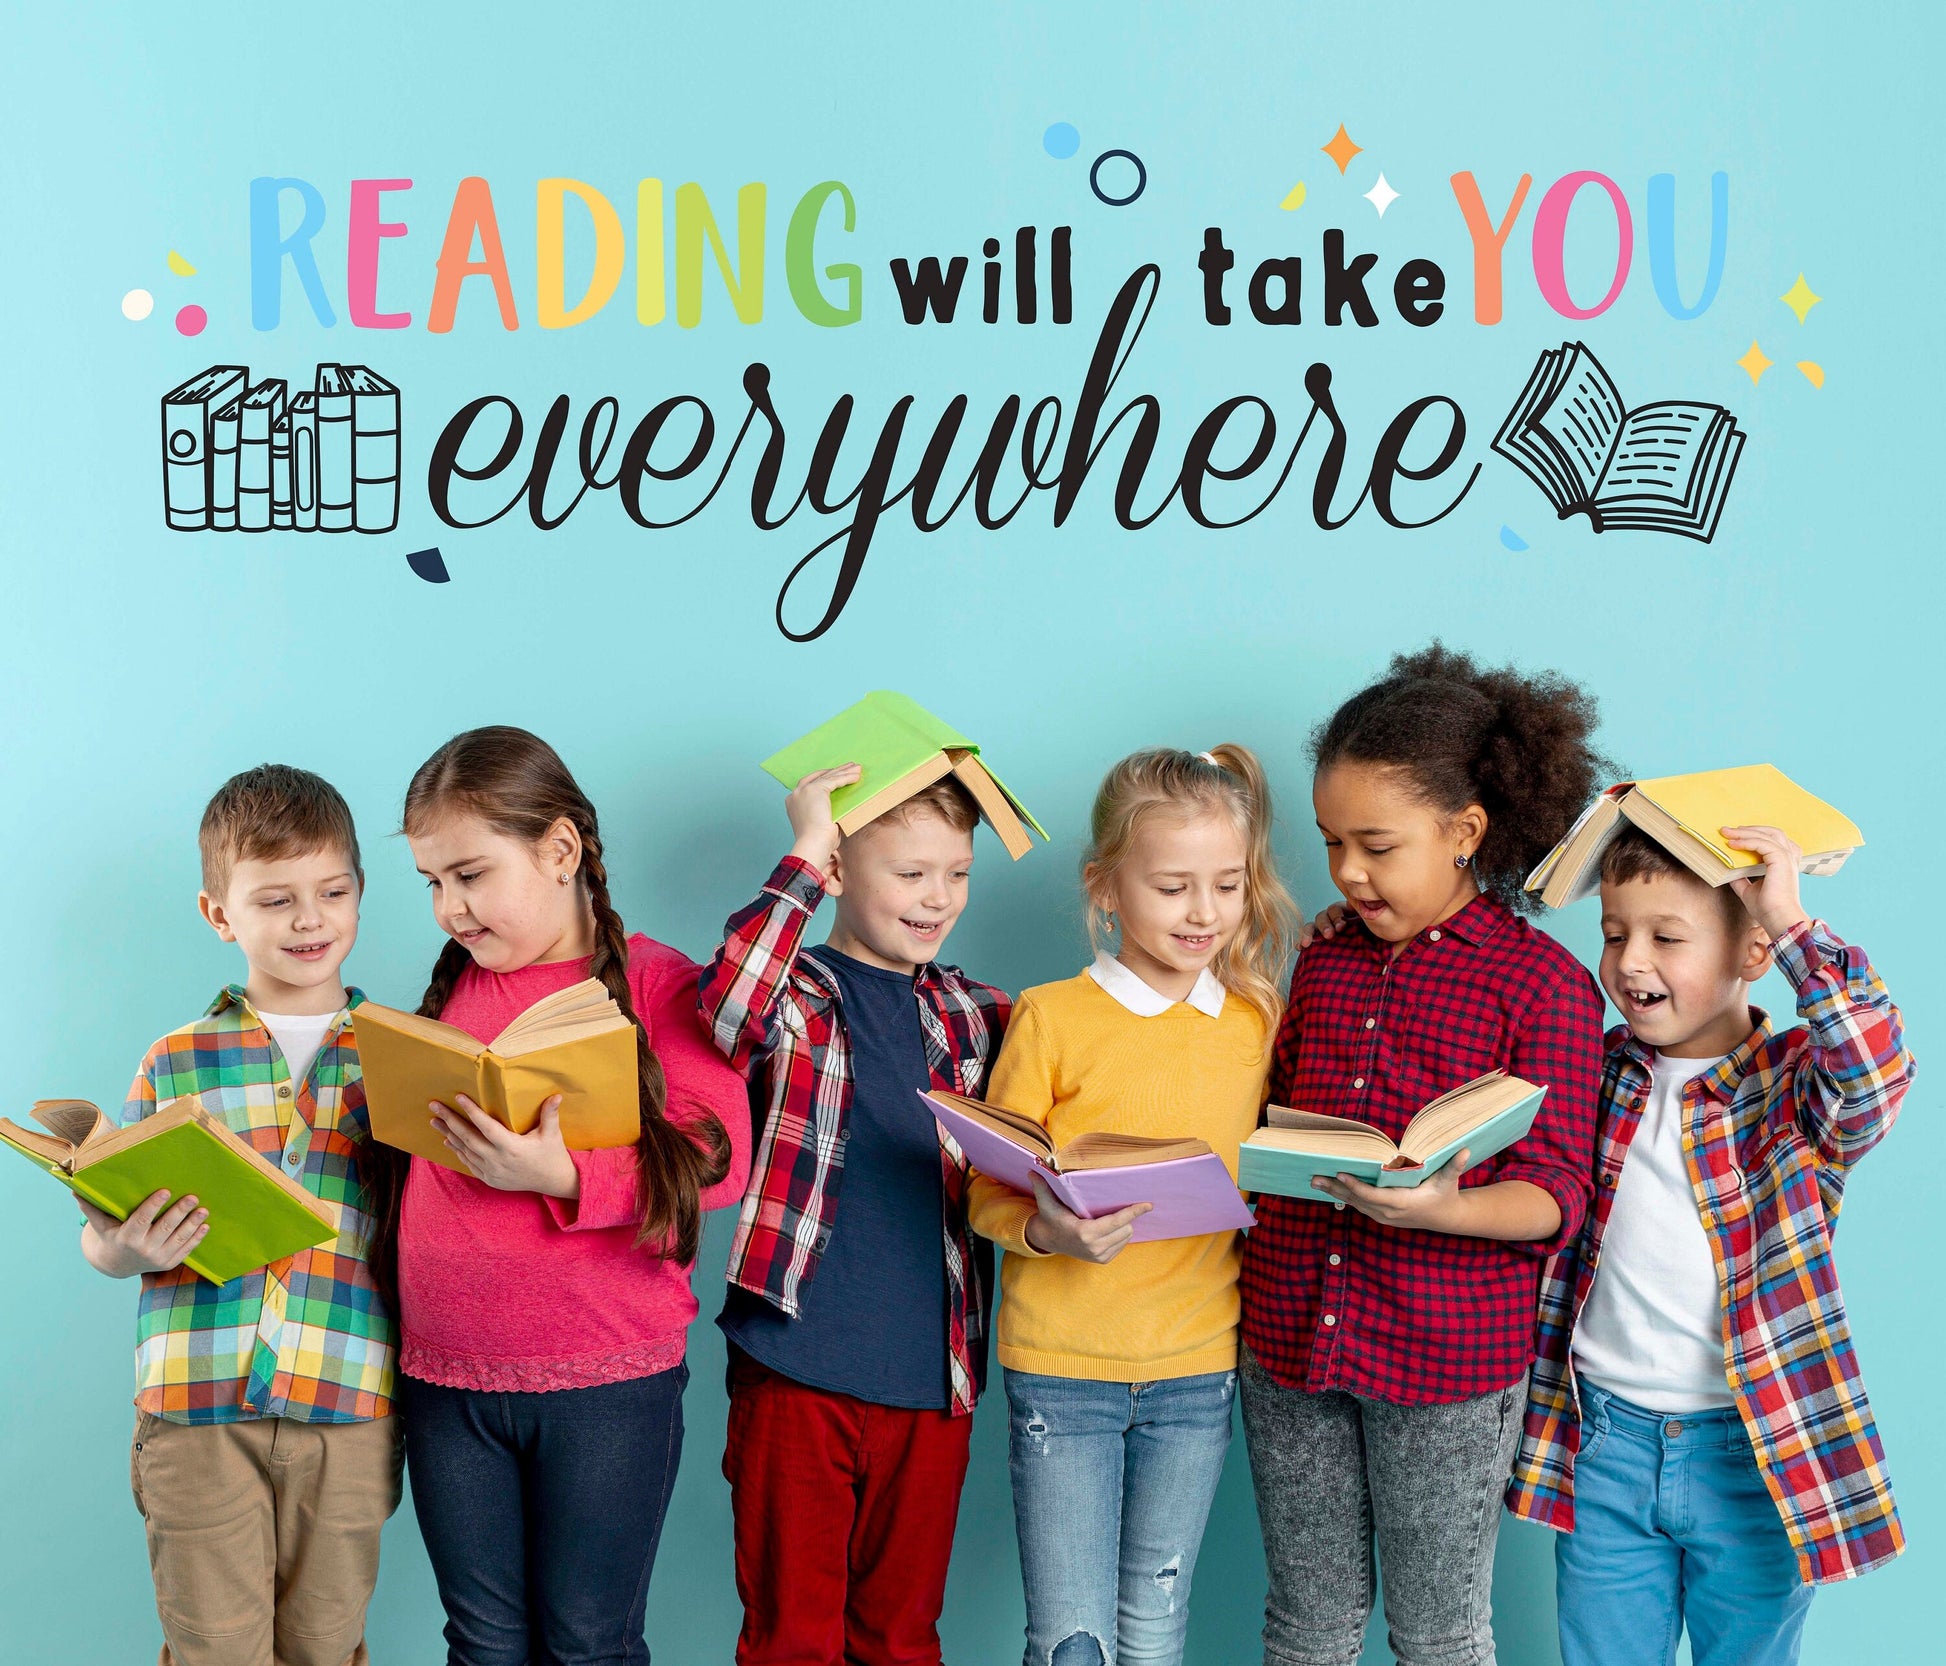 Reading will take you everywhere Wall Decal Playroom Stickers Classroom Decor Kids Books, LF356